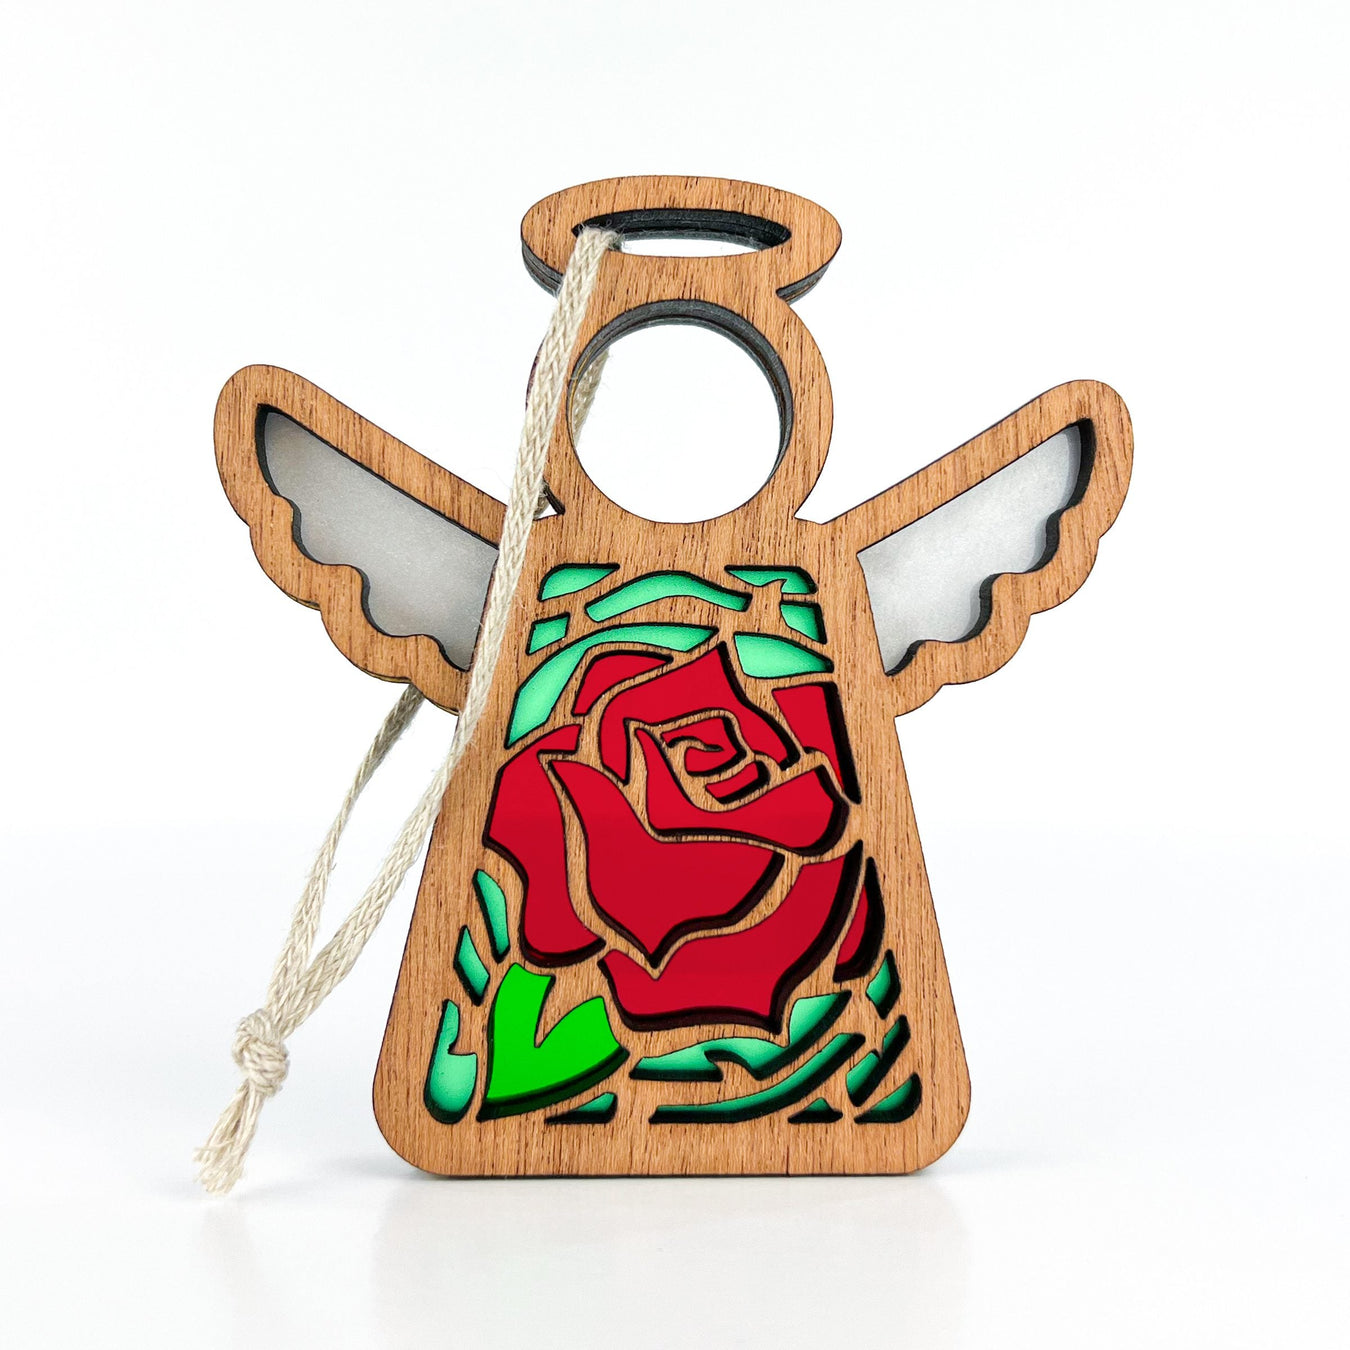 Mother's Angels® ornament with a vibrant red rose design, crafted from sapele wood and inspired by stained glass, a unique and beautiful Mother's Day gift or memorial gift for loss symbolizing love and appreciation.